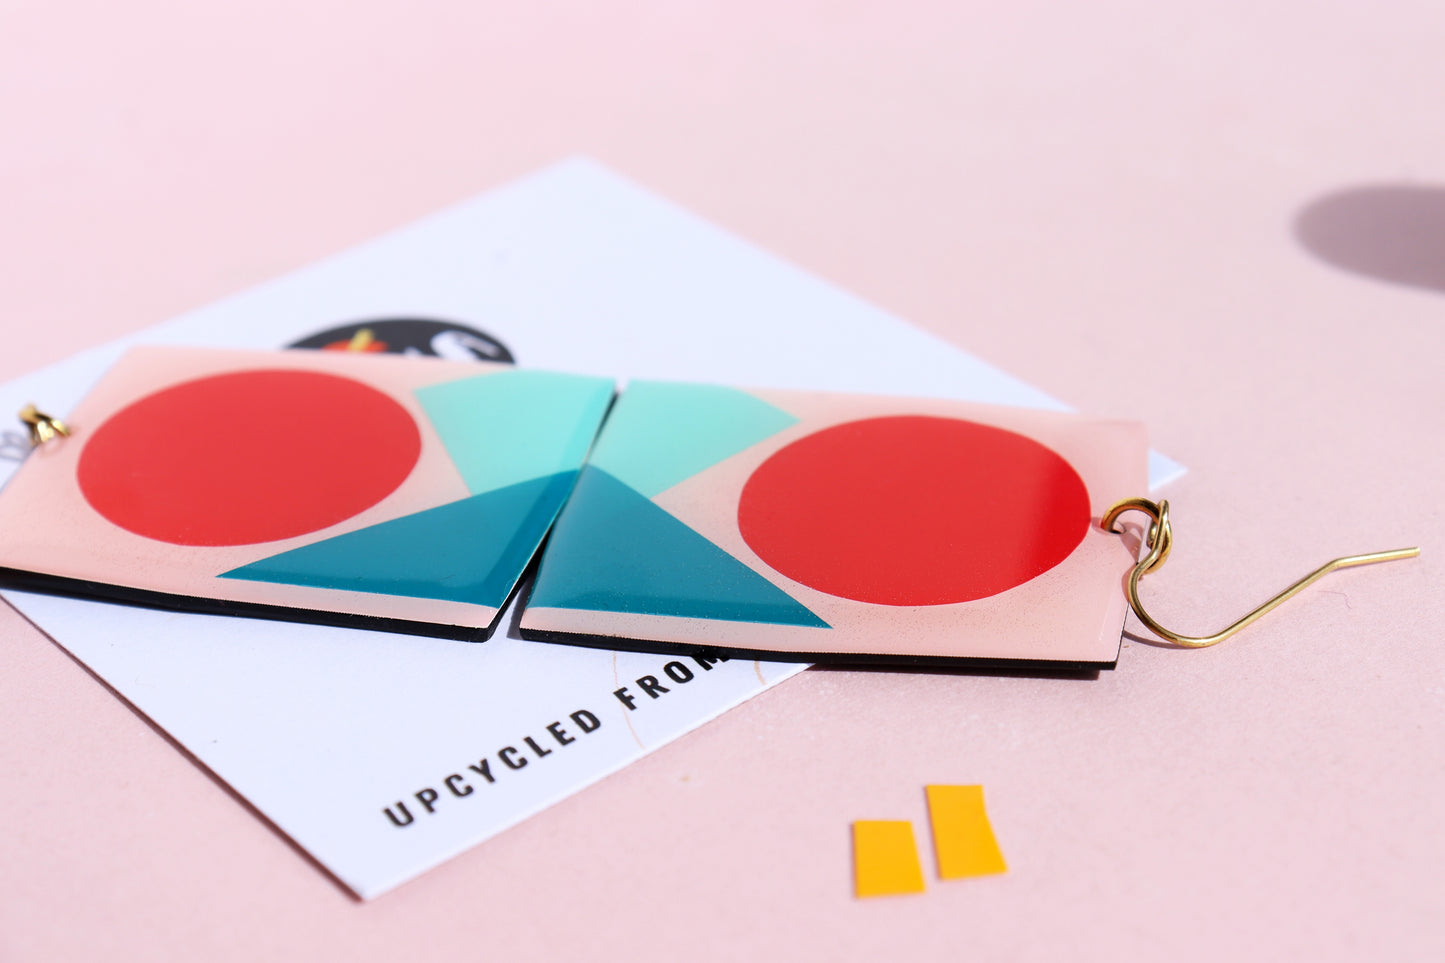 IRIS Contemporary statement earrings in red, teal and turquoise / upcycled vinyl record